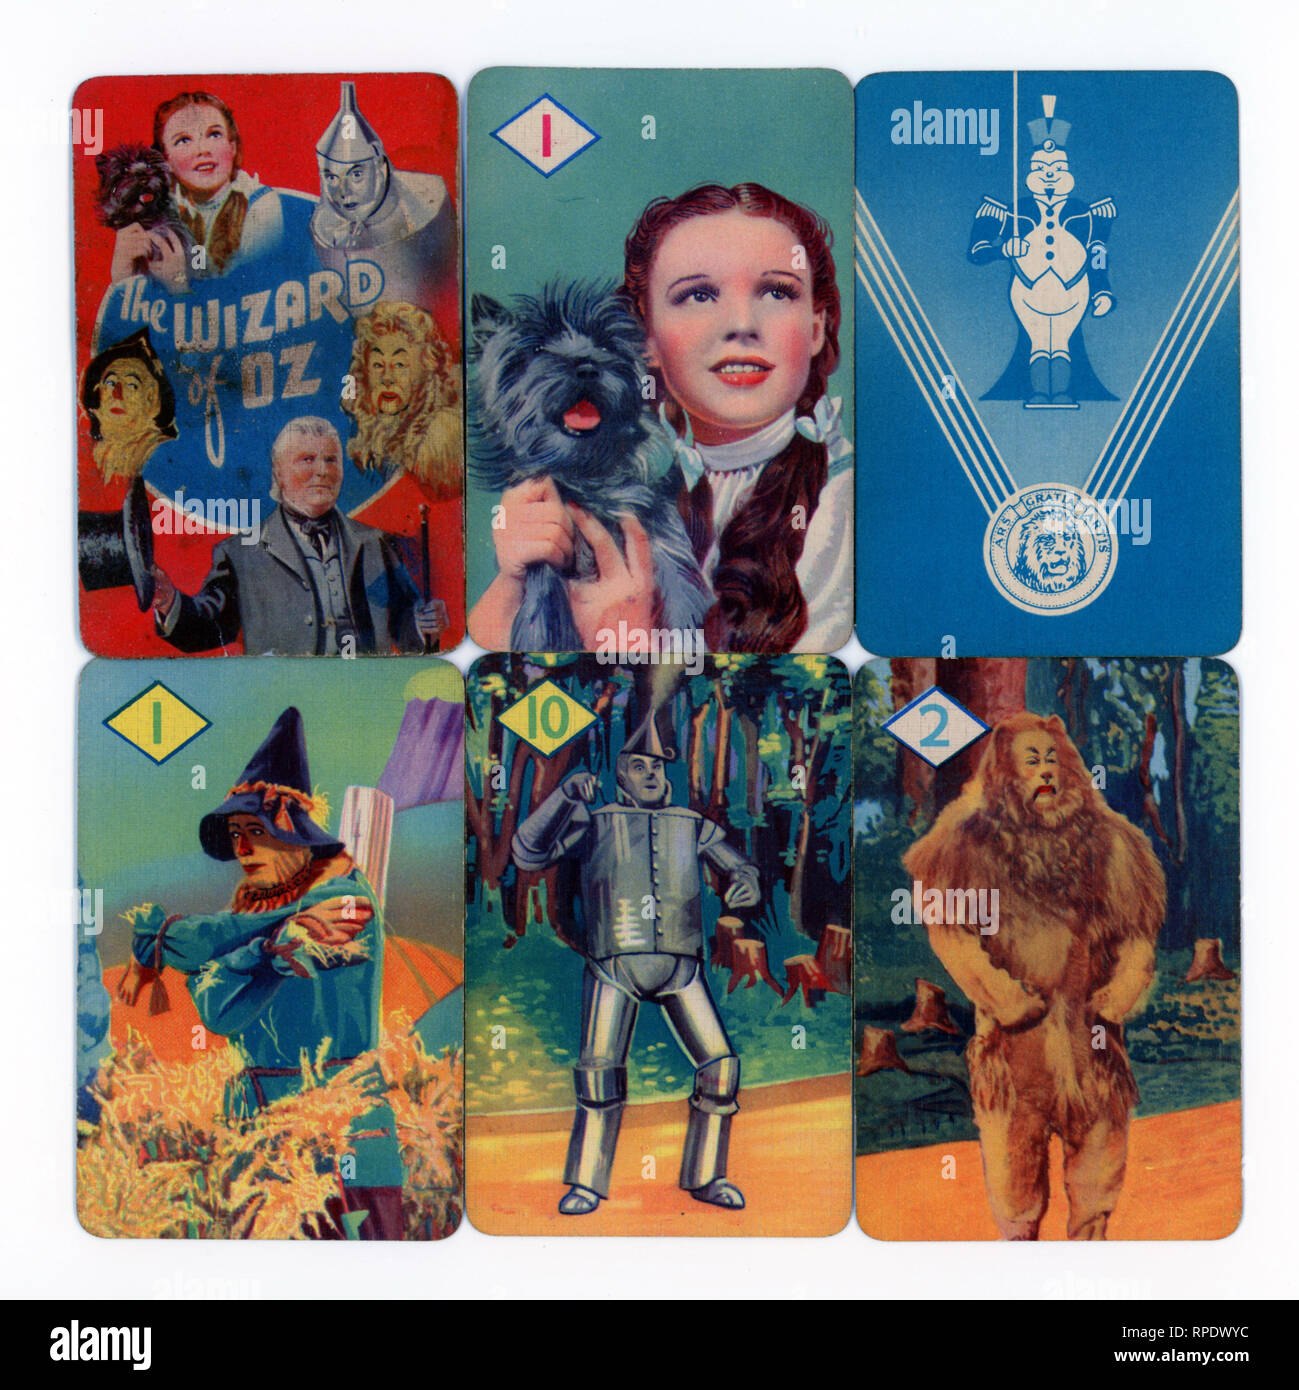 The Wizard of Oz card game produced in London in 1940 by Castell Brothers, Ltd. (Pepys brand) to coincide with the launch of the M.G.M. film in the UK in that year Stock Photo